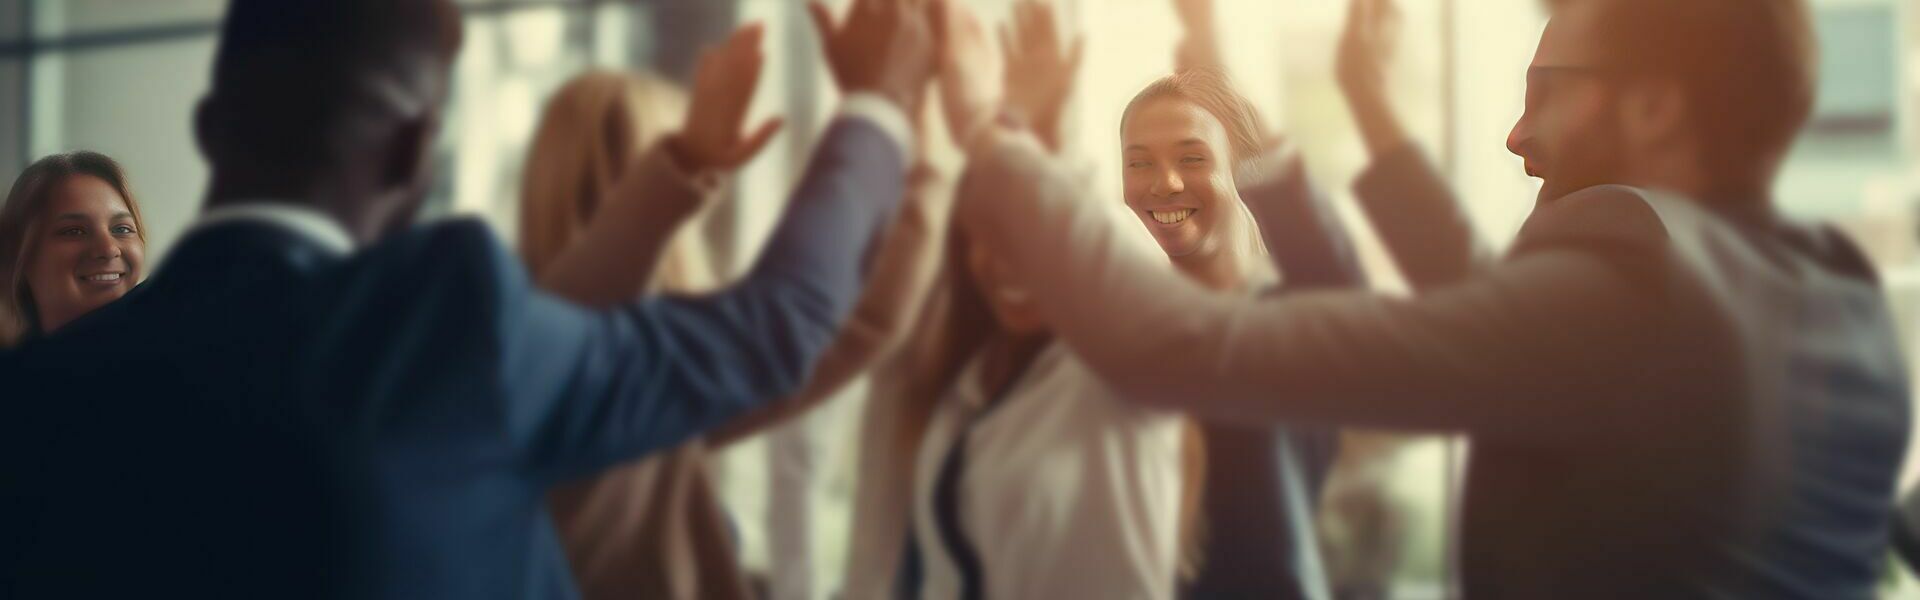 Blurred image of a diverse business team happily celebrating success and having fun together, high-fiving and cheering.